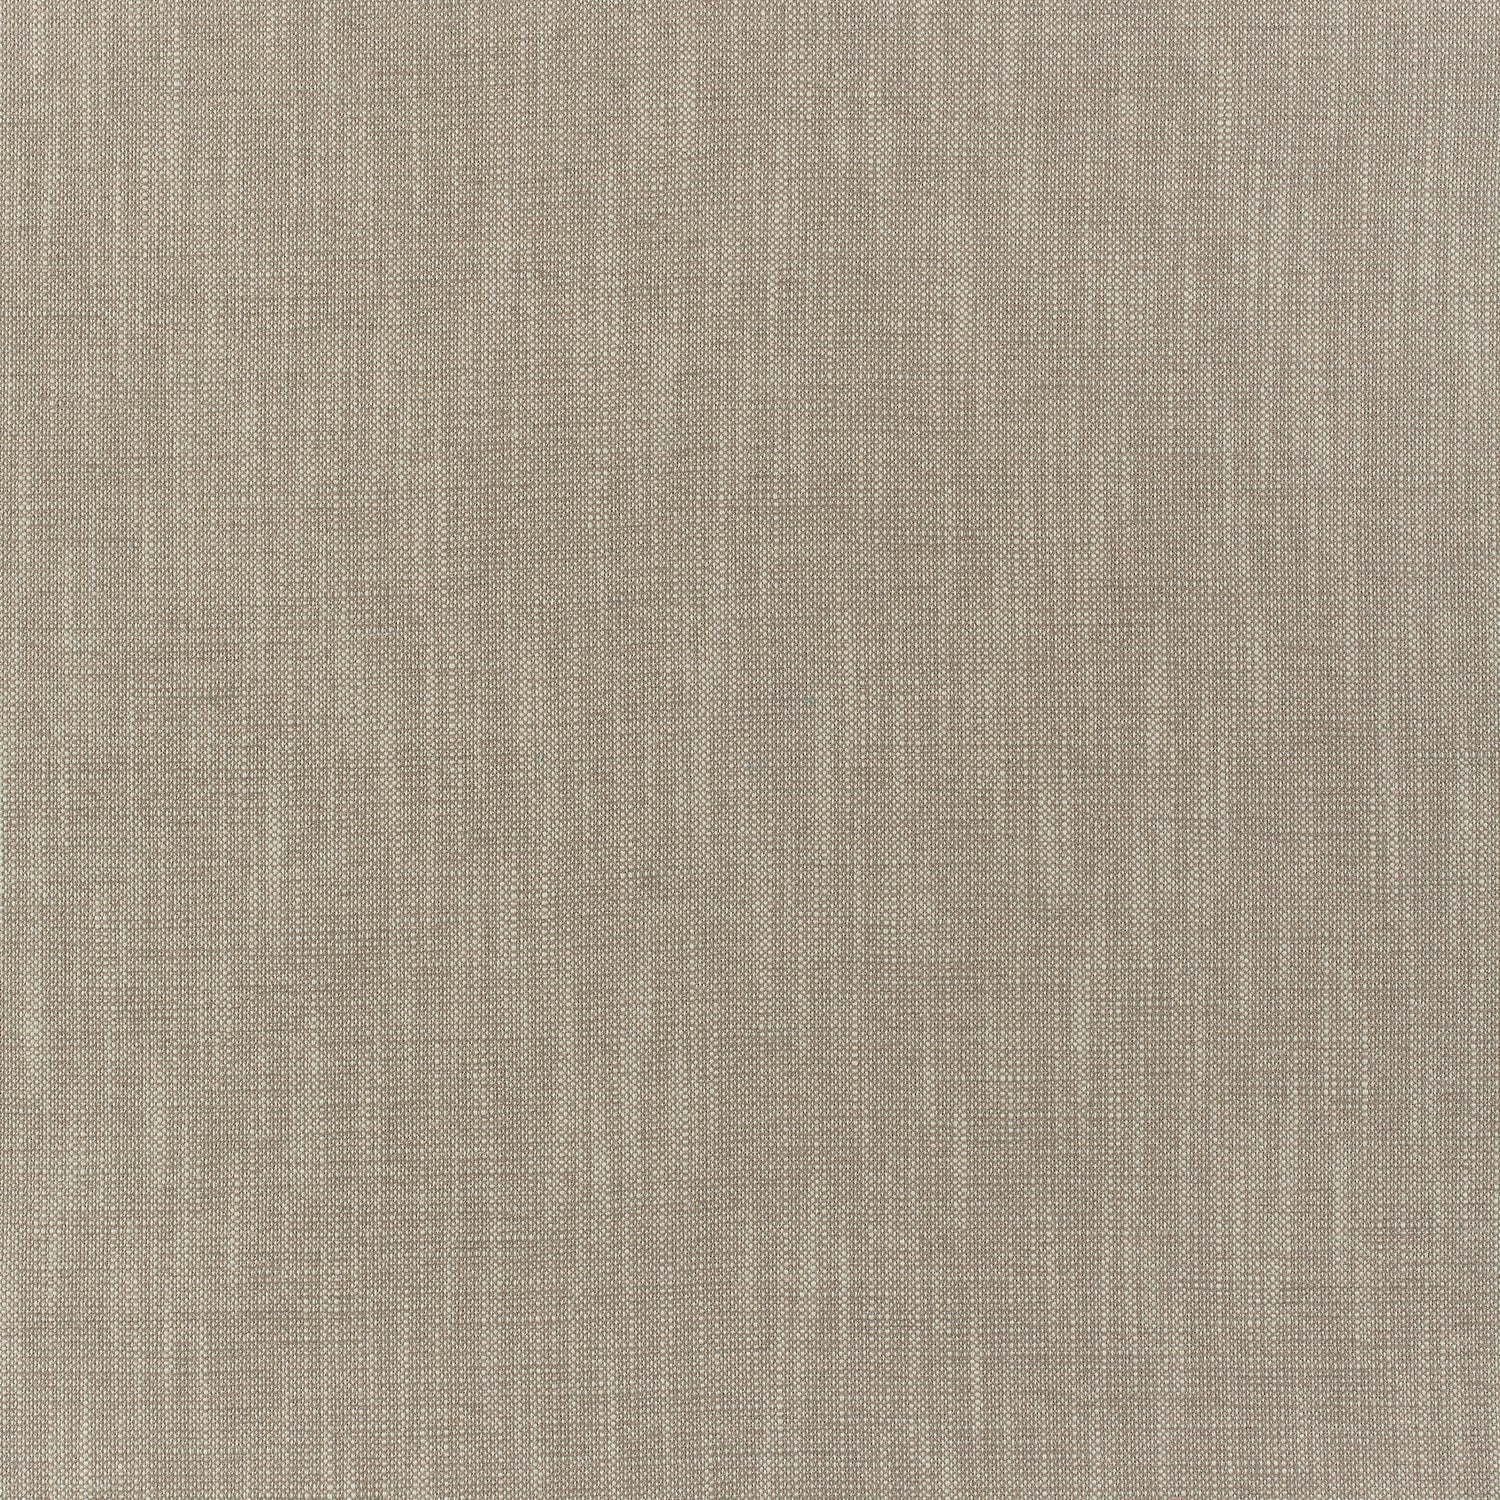 Bailey fabric in taupe color - pattern number W80503 - by Thibaut in the Mosaic collection